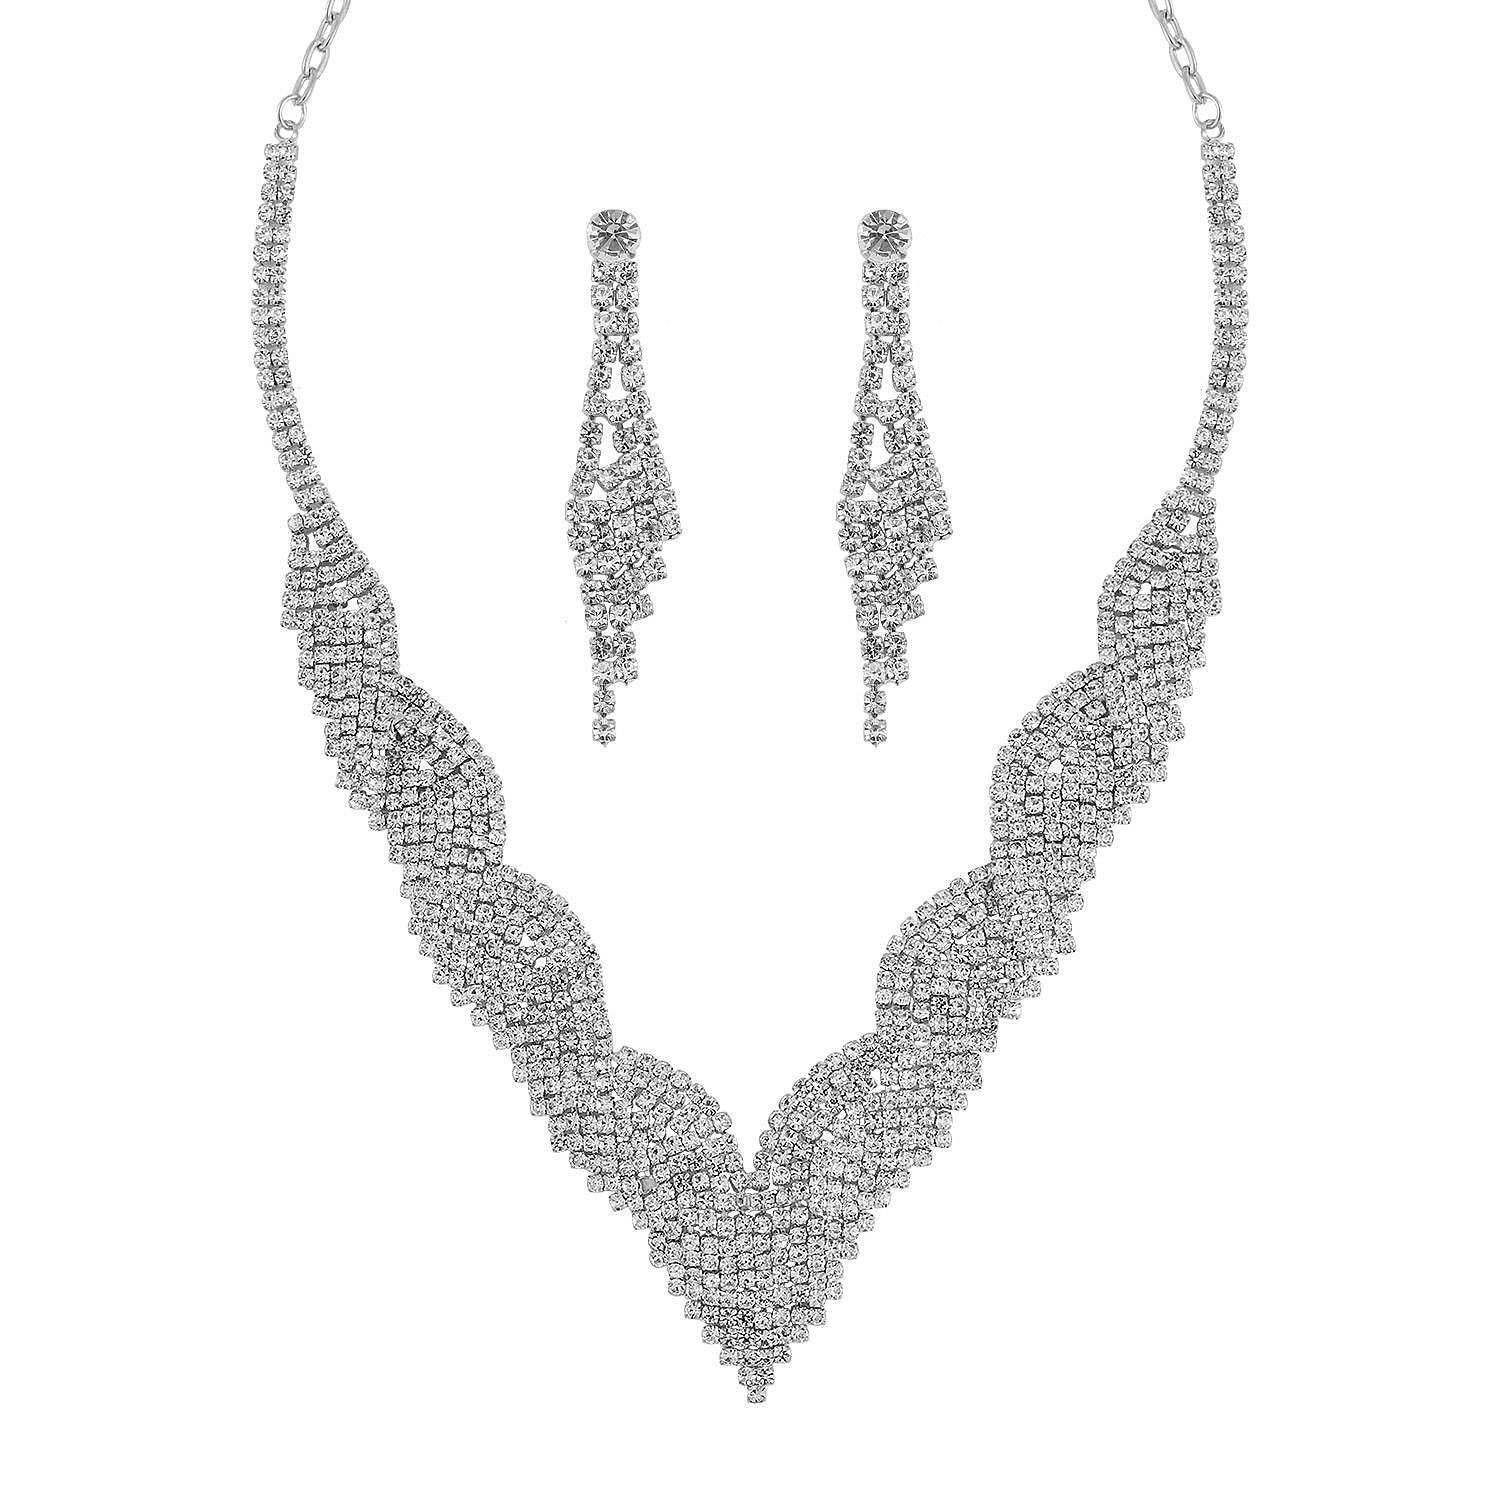 2 Piece Set - Austrian White Crystal Necklace (Size 20-2 inch Ext.) and Earrings in Silver Tone